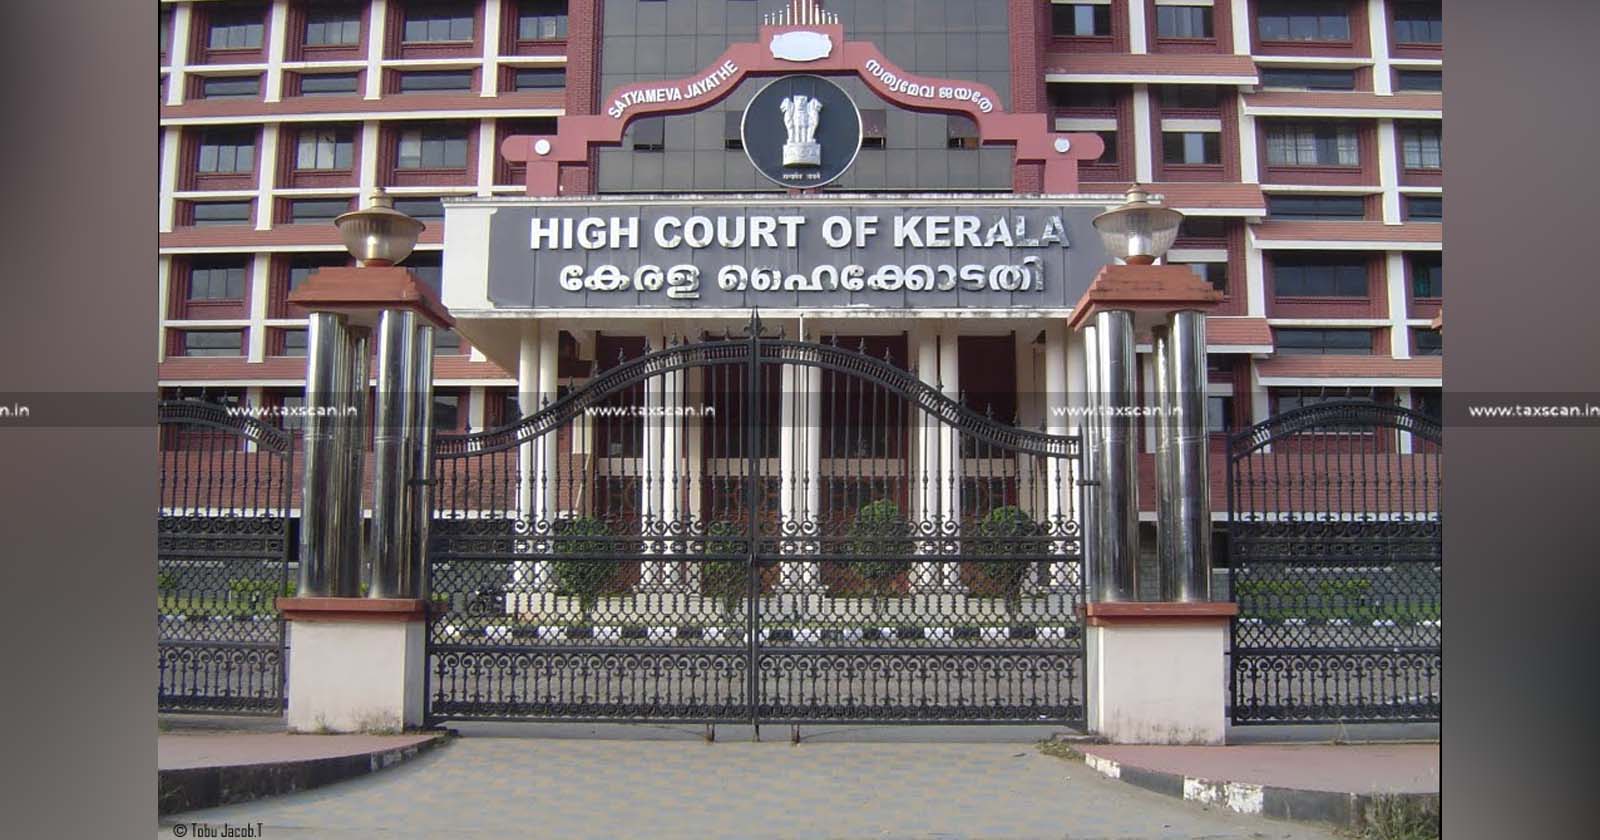 License - License to Run Shop - Shop - License to Run Shop Transferred to Son on Mother's Will - Kerala HC - taxscan